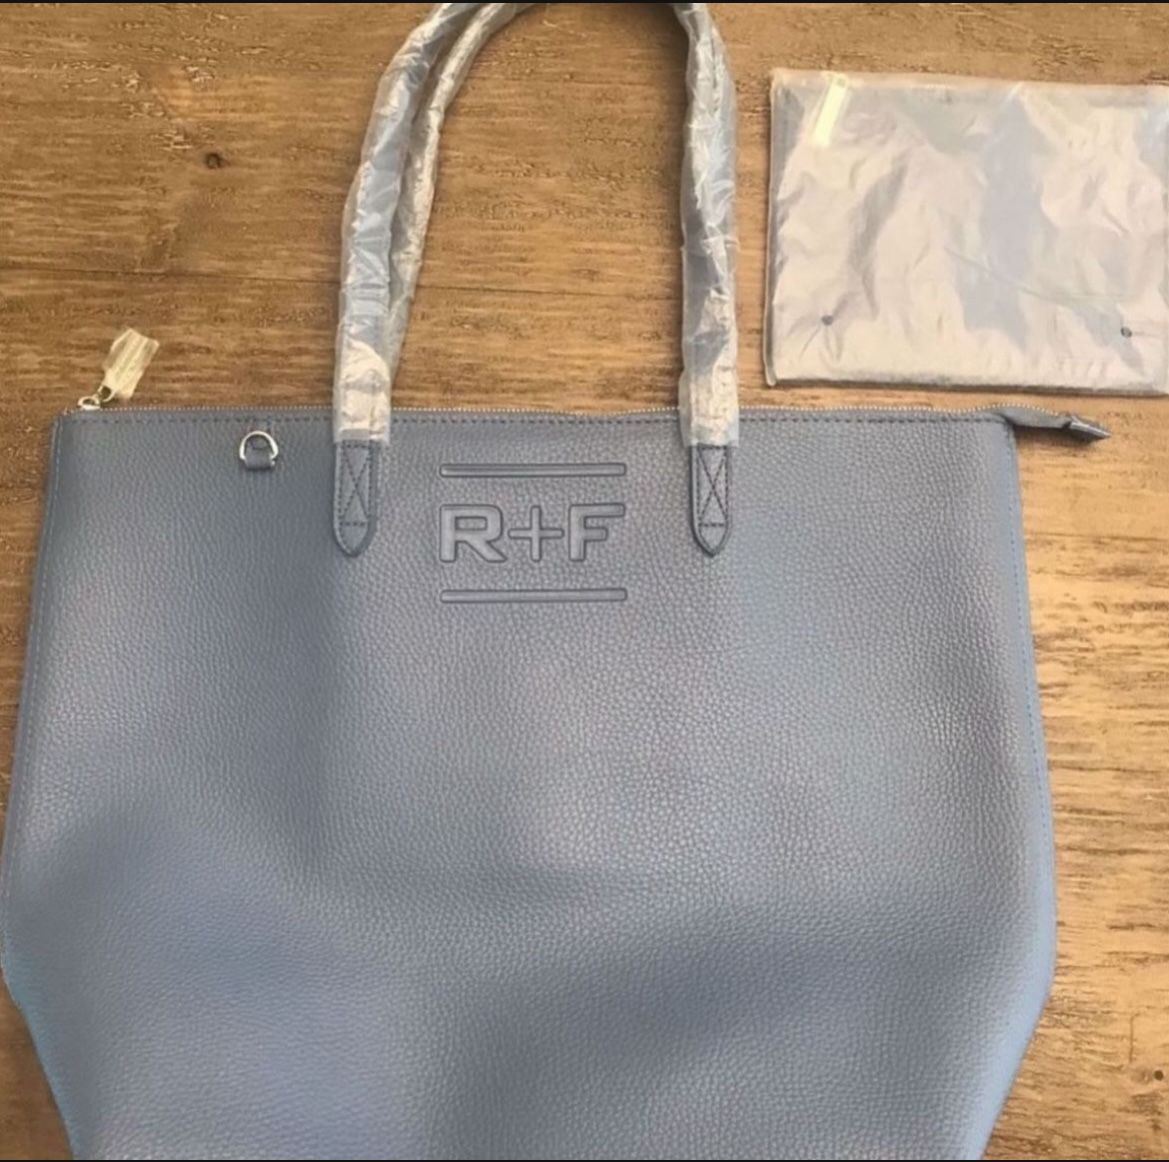 Rodan and Fields faux leather large bag. Brand new